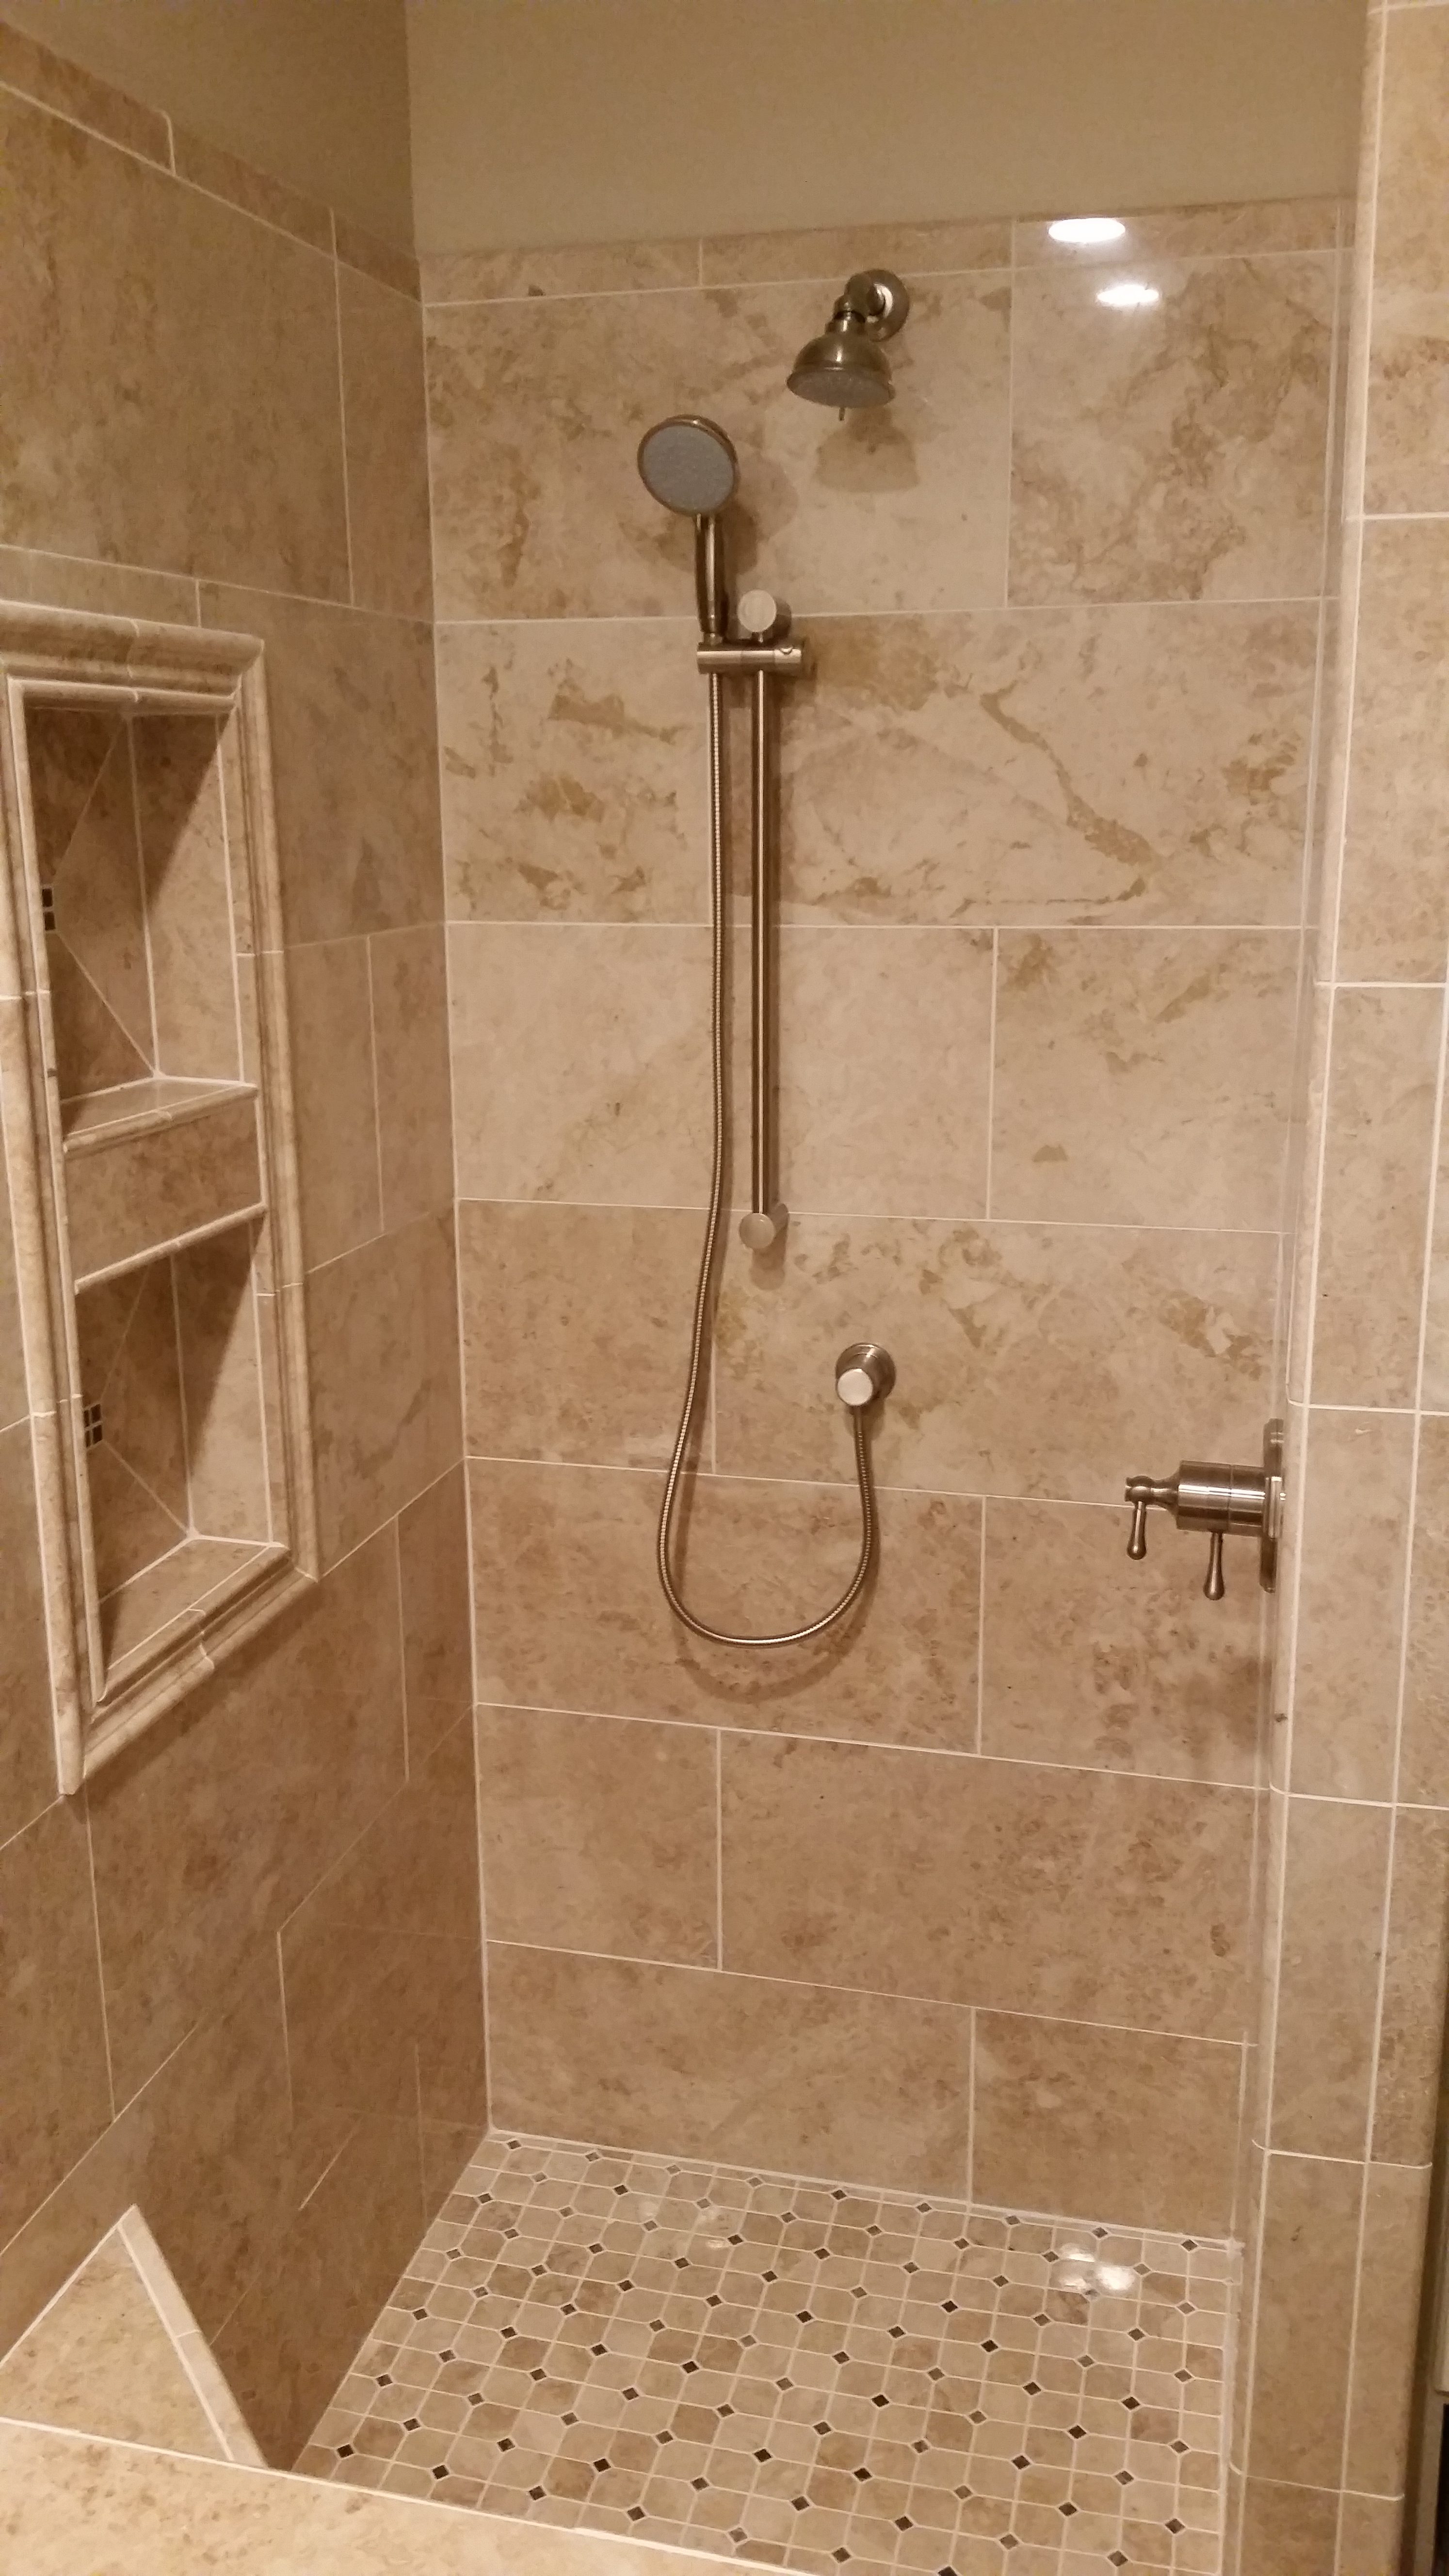 Tile work in this shower by CertaPro Painters of East Tennessee